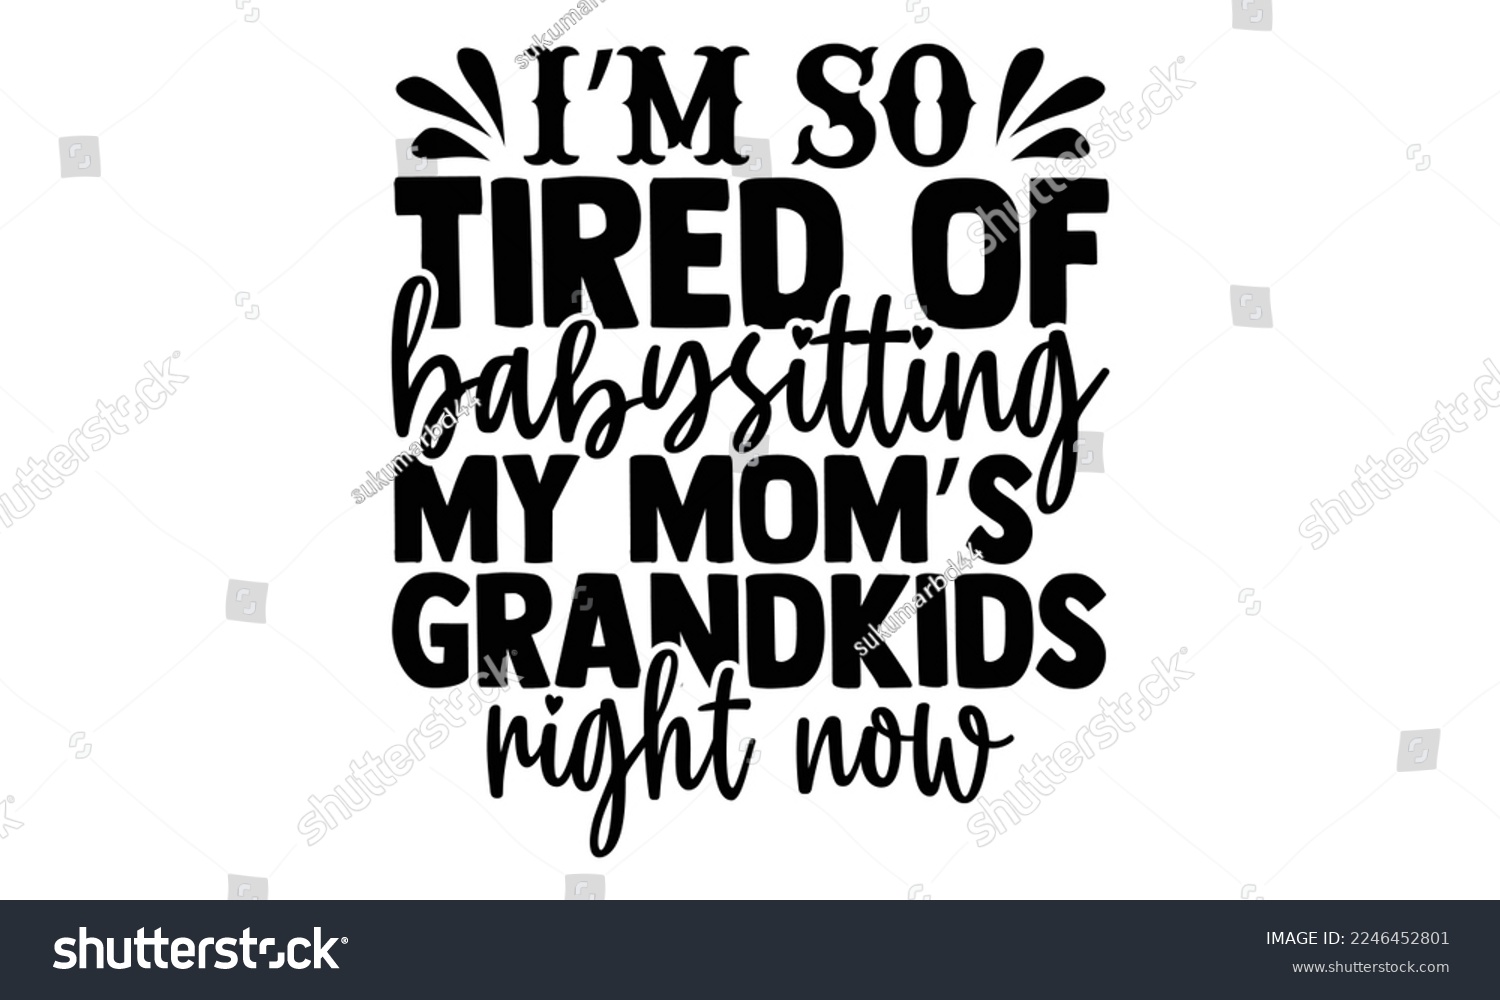 SVG of I’m So Tired Of Babysitting My Mom’s Grandkids Right Now - Babysitting svg quotes Design, Cutting Machine, Silhouette Cameo, t-shirt, Hand drawn lettering phrase isolated on white background. svg